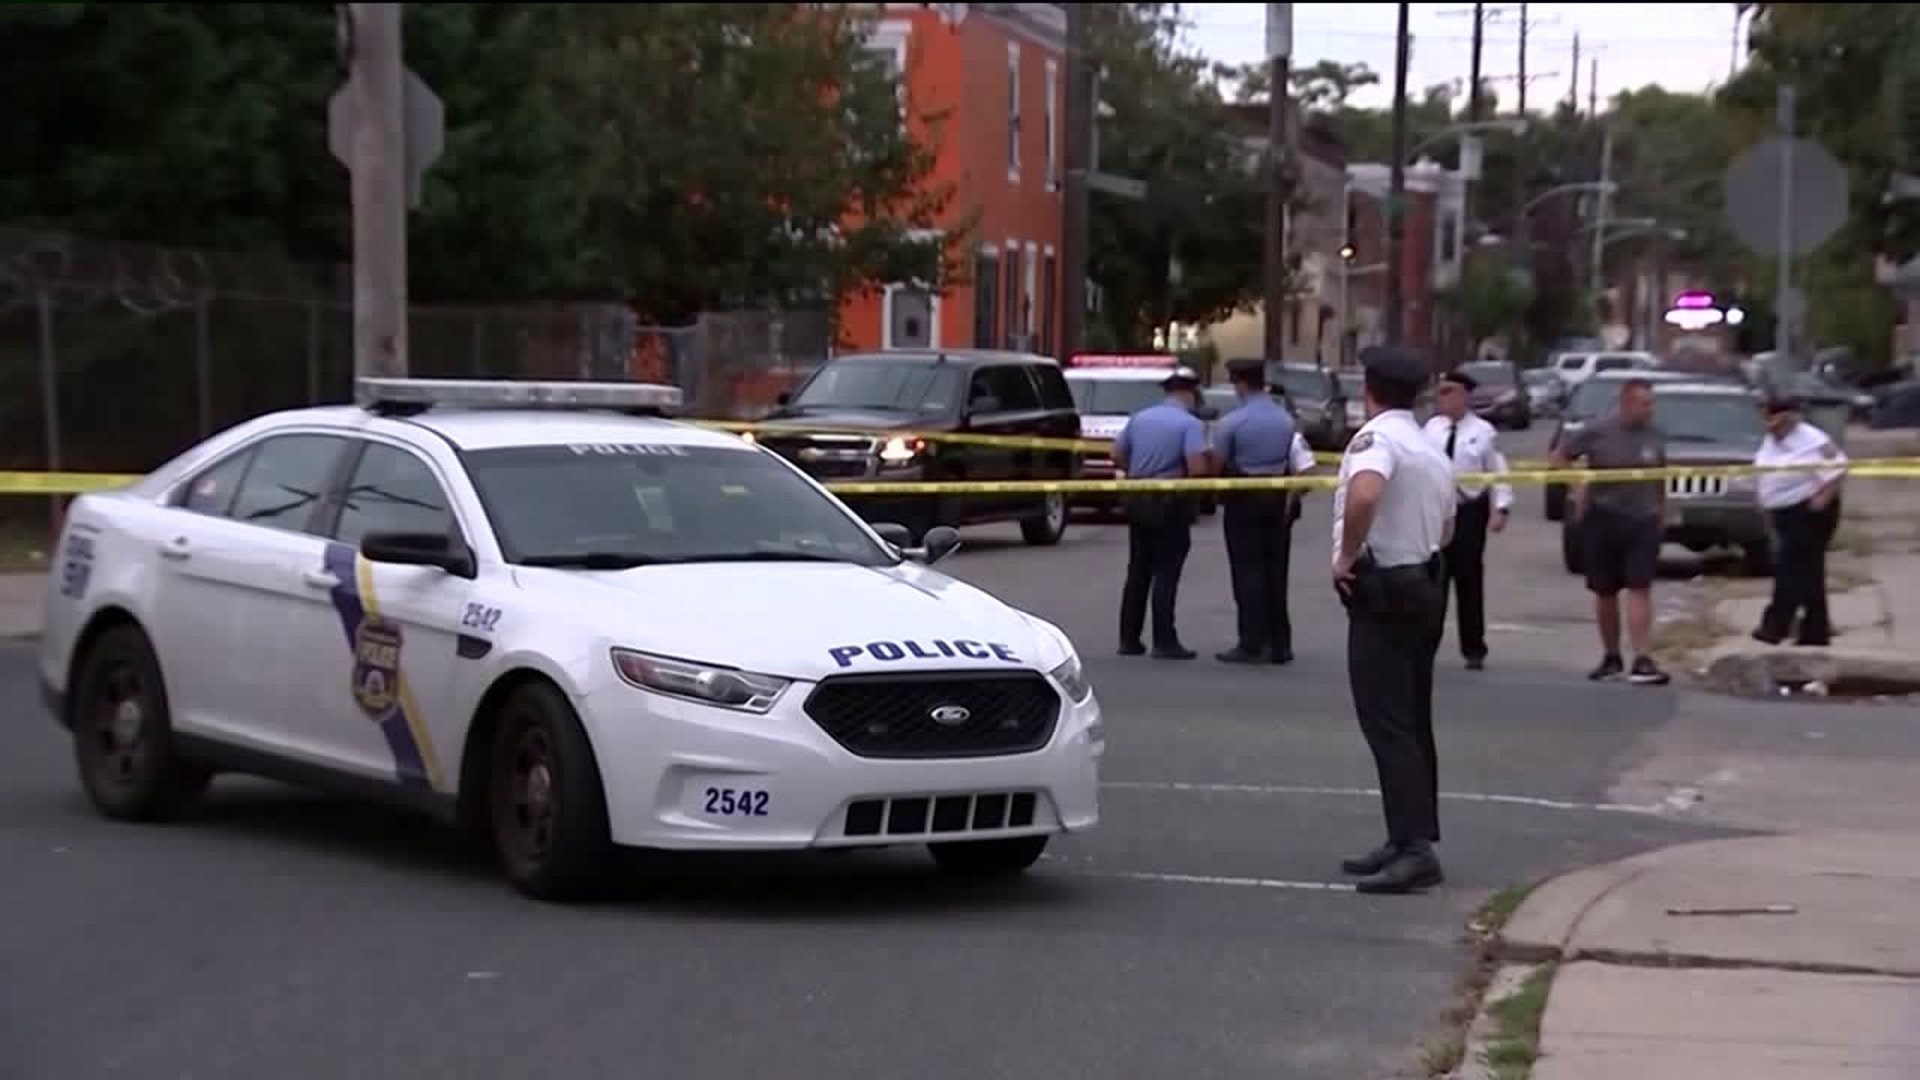 Six People Hospitalized After Being Shot in Philadelphia